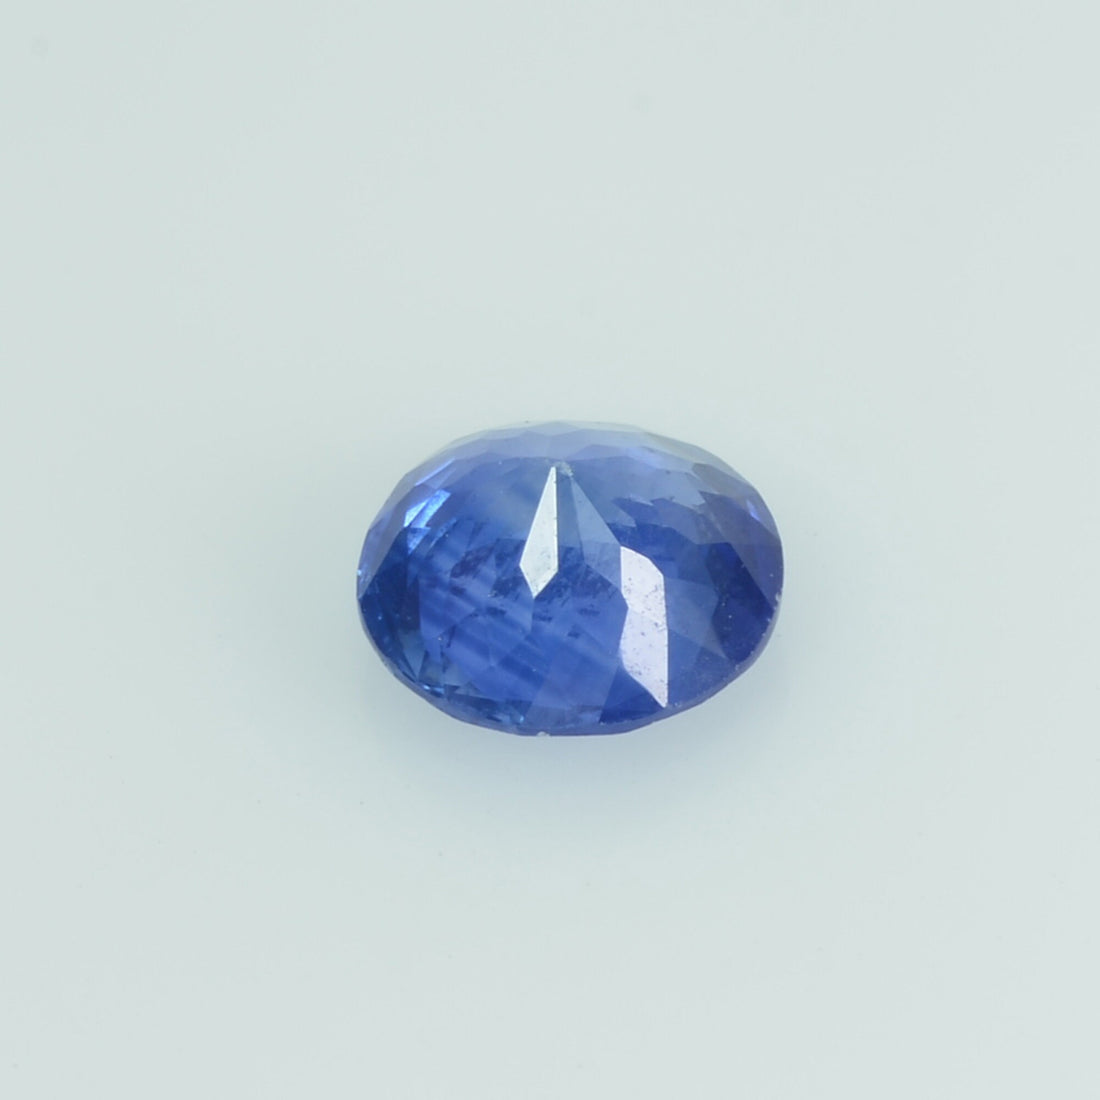 0.87 Cts Natural Blue Sapphire Loose Gemstone Round Cut